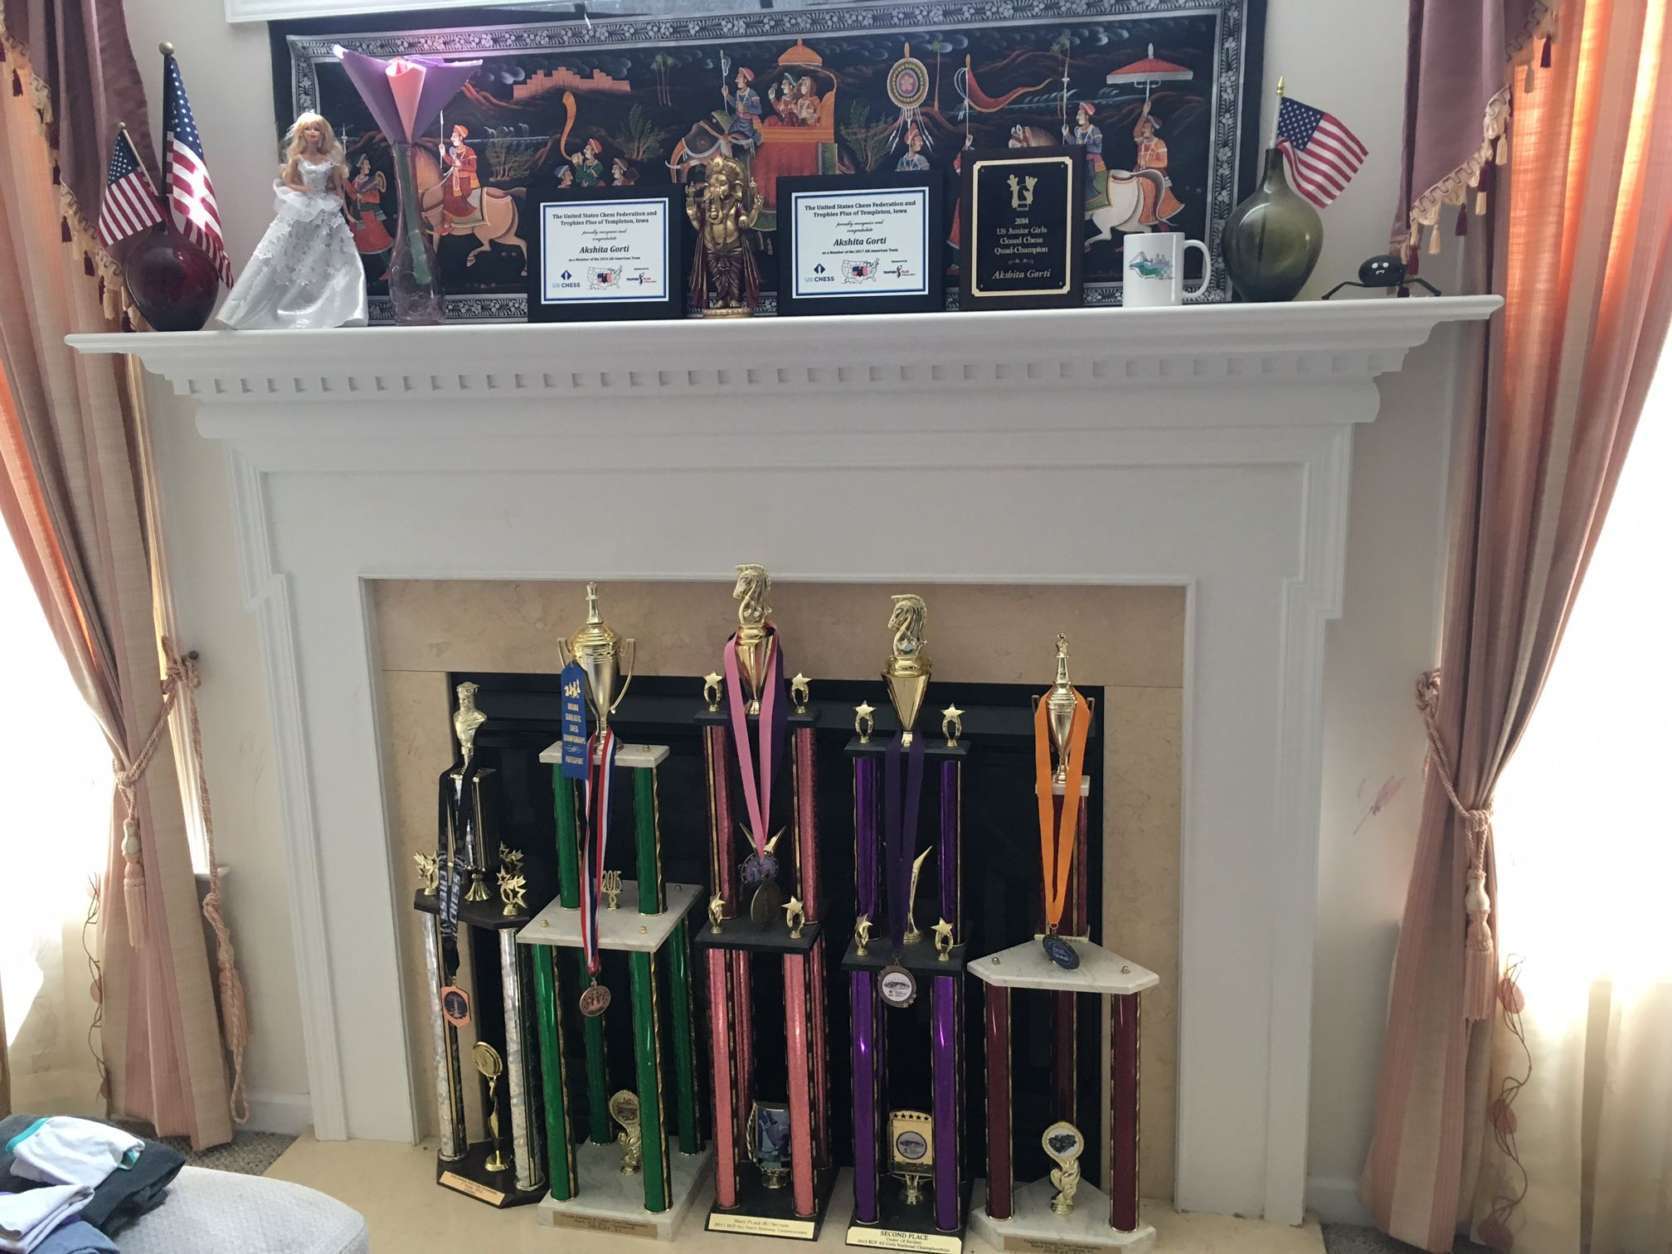 A host of awards line the fireplace at Gorti's home from the tournaments she's won. (WTOP/Noah Frank)